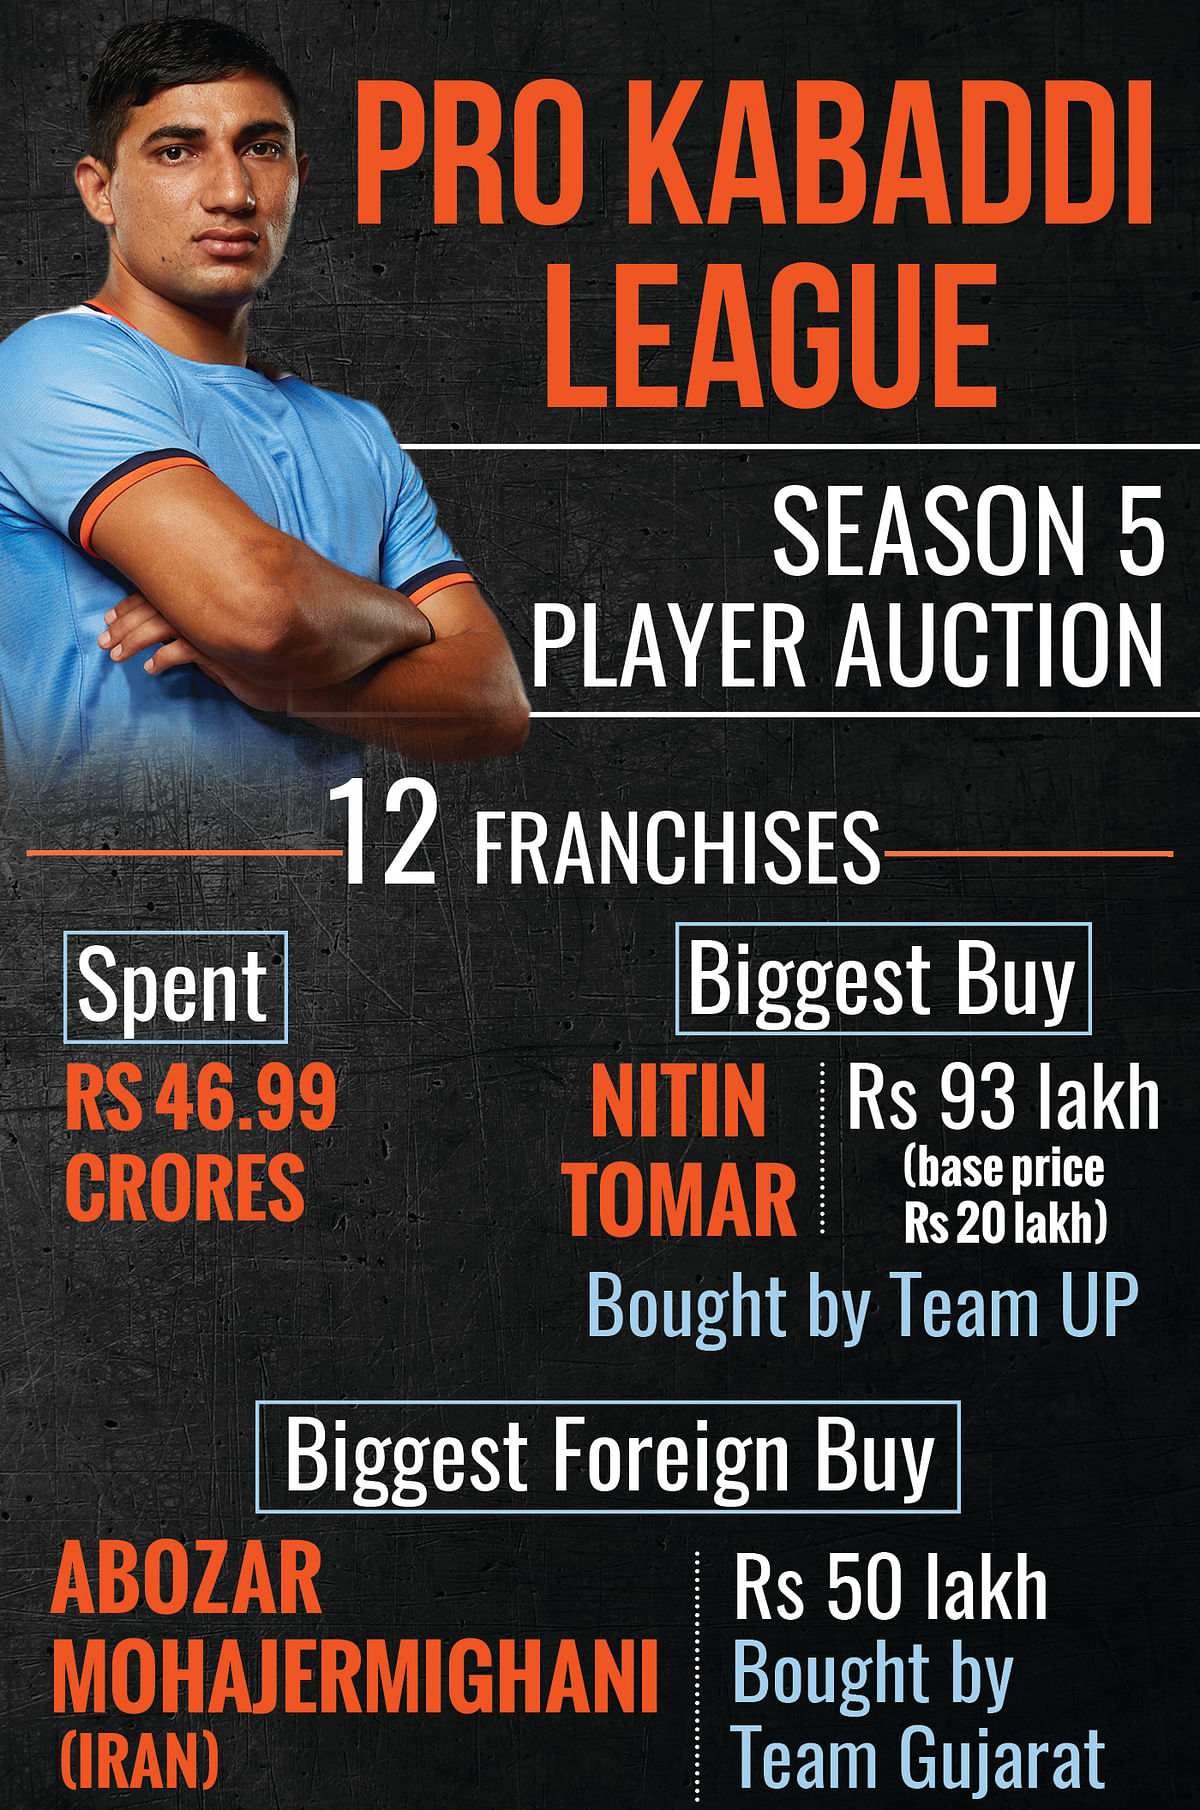 Over 27 lakh spent on Day 1 of the auction. Four new teams. Ninety-three lakh for Nitin Tomar.